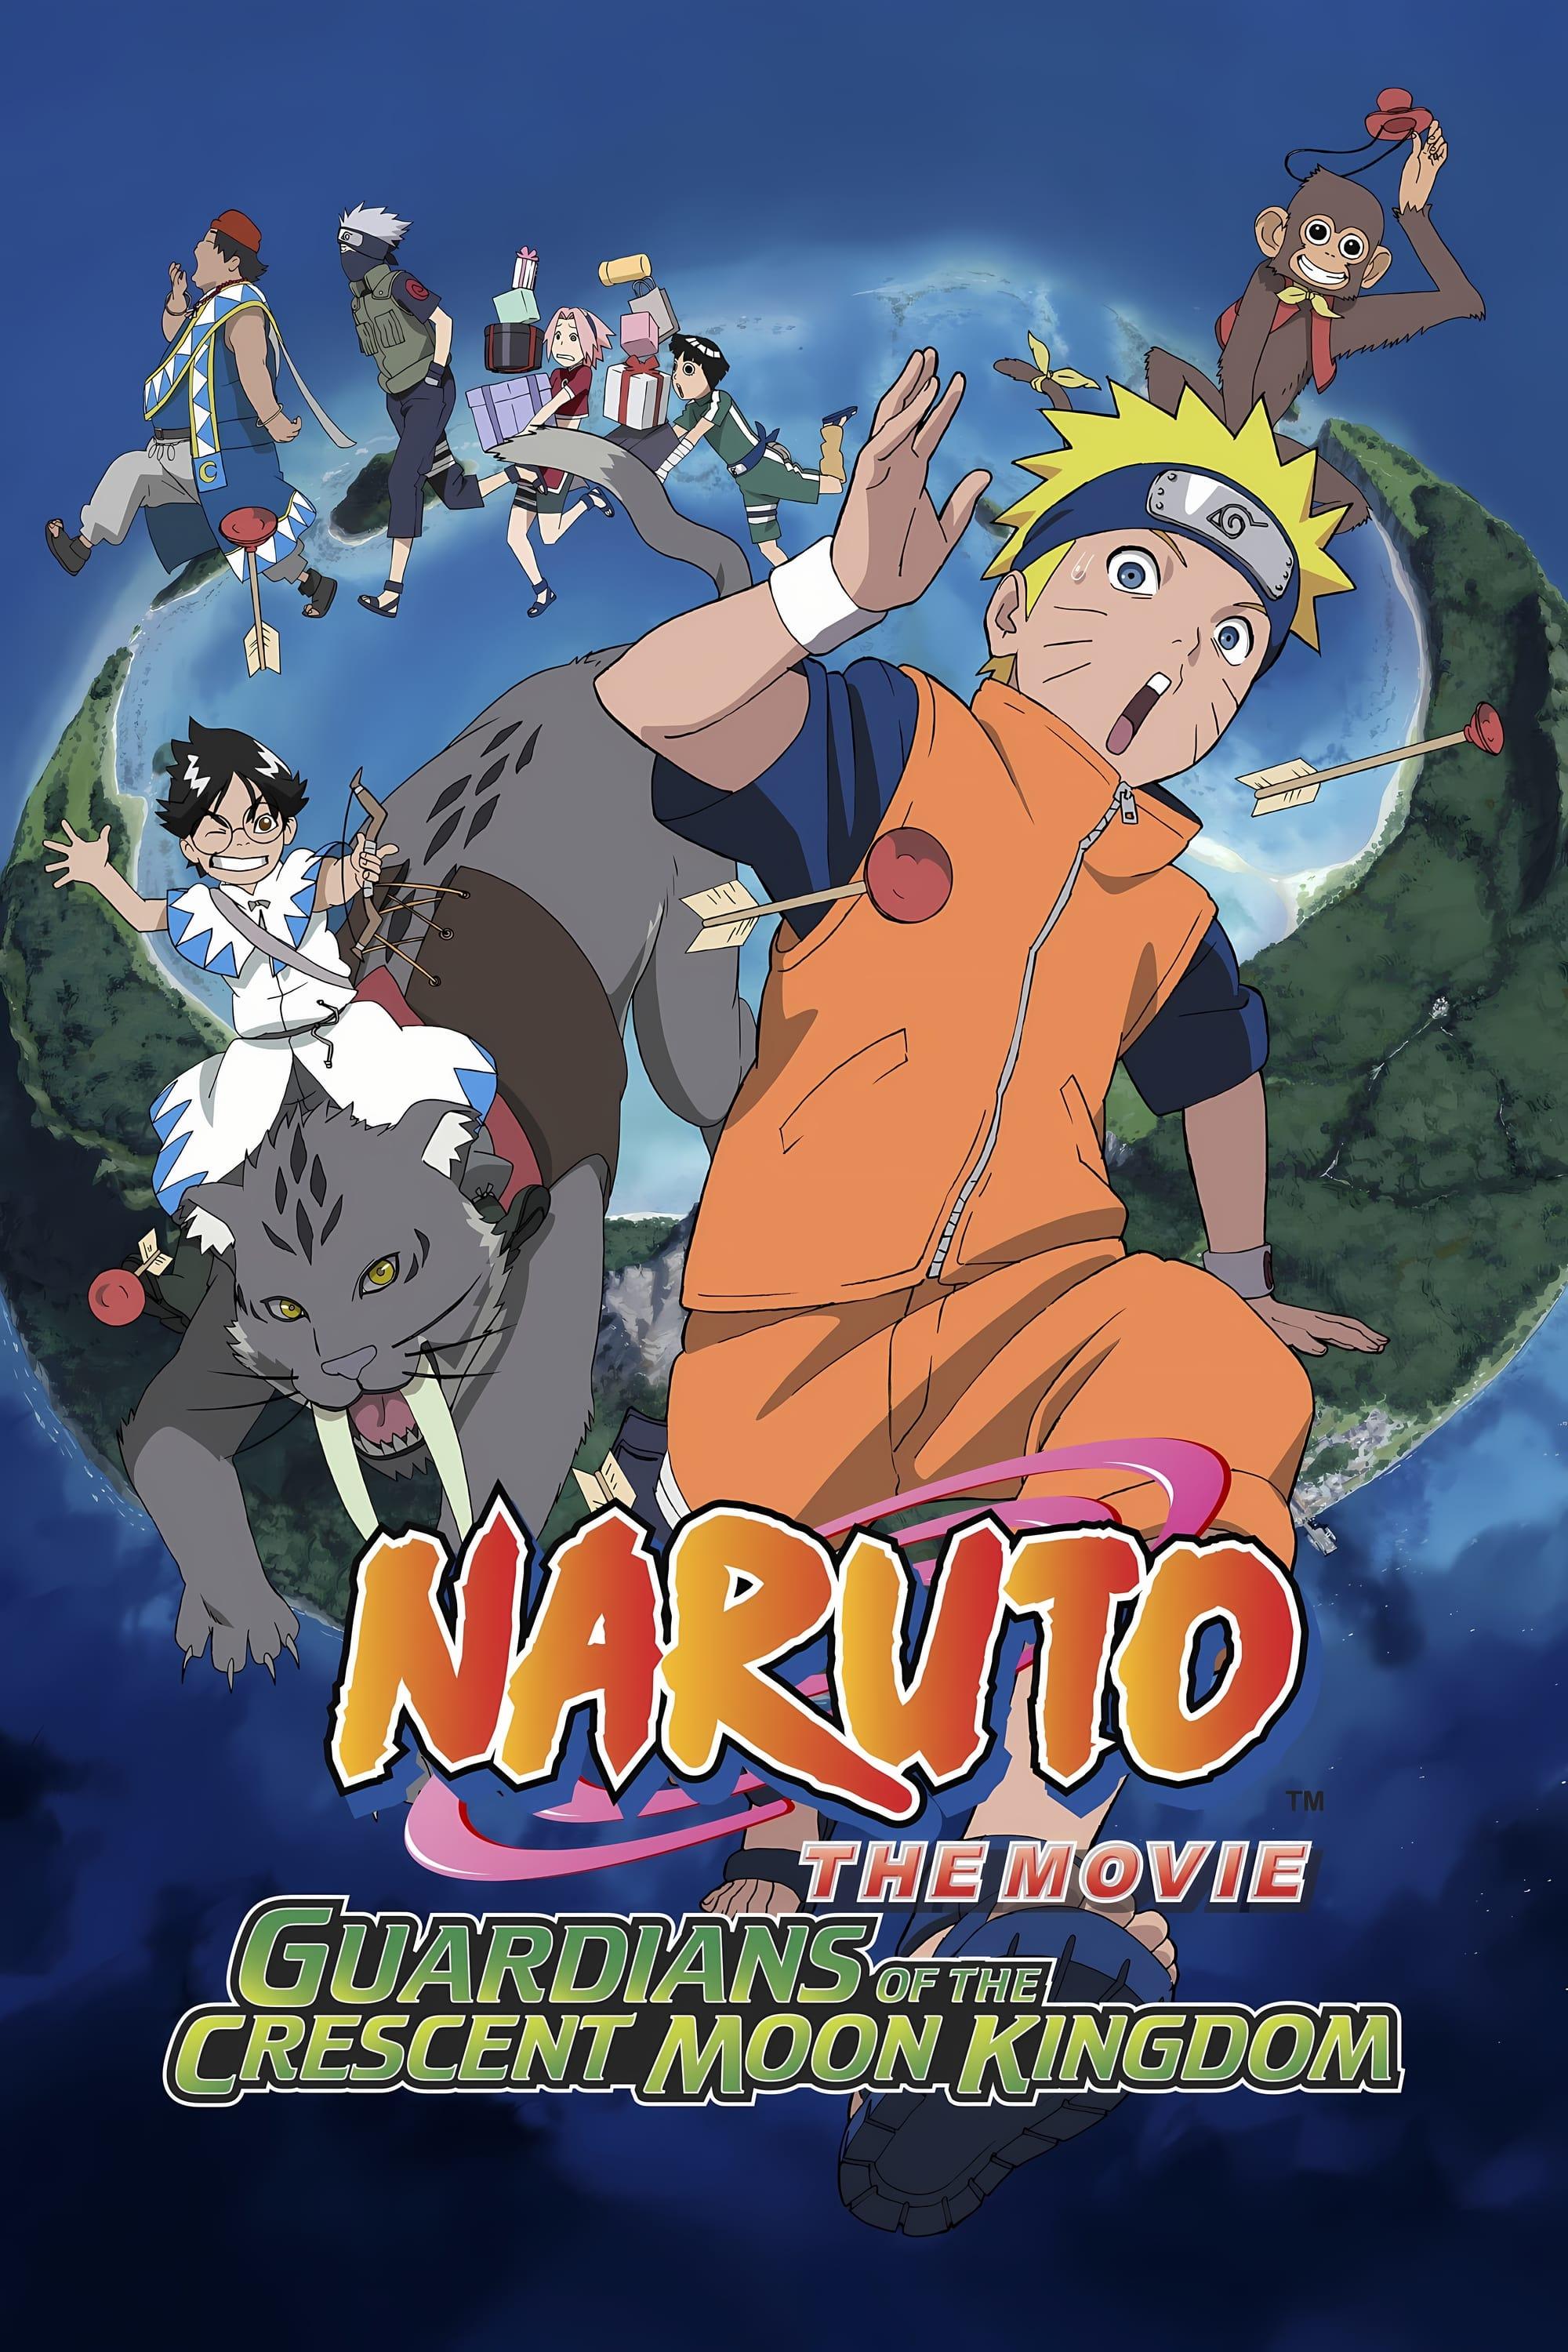 Naruto the Movie: Guardians of the Crescent Moon Kingdom poster